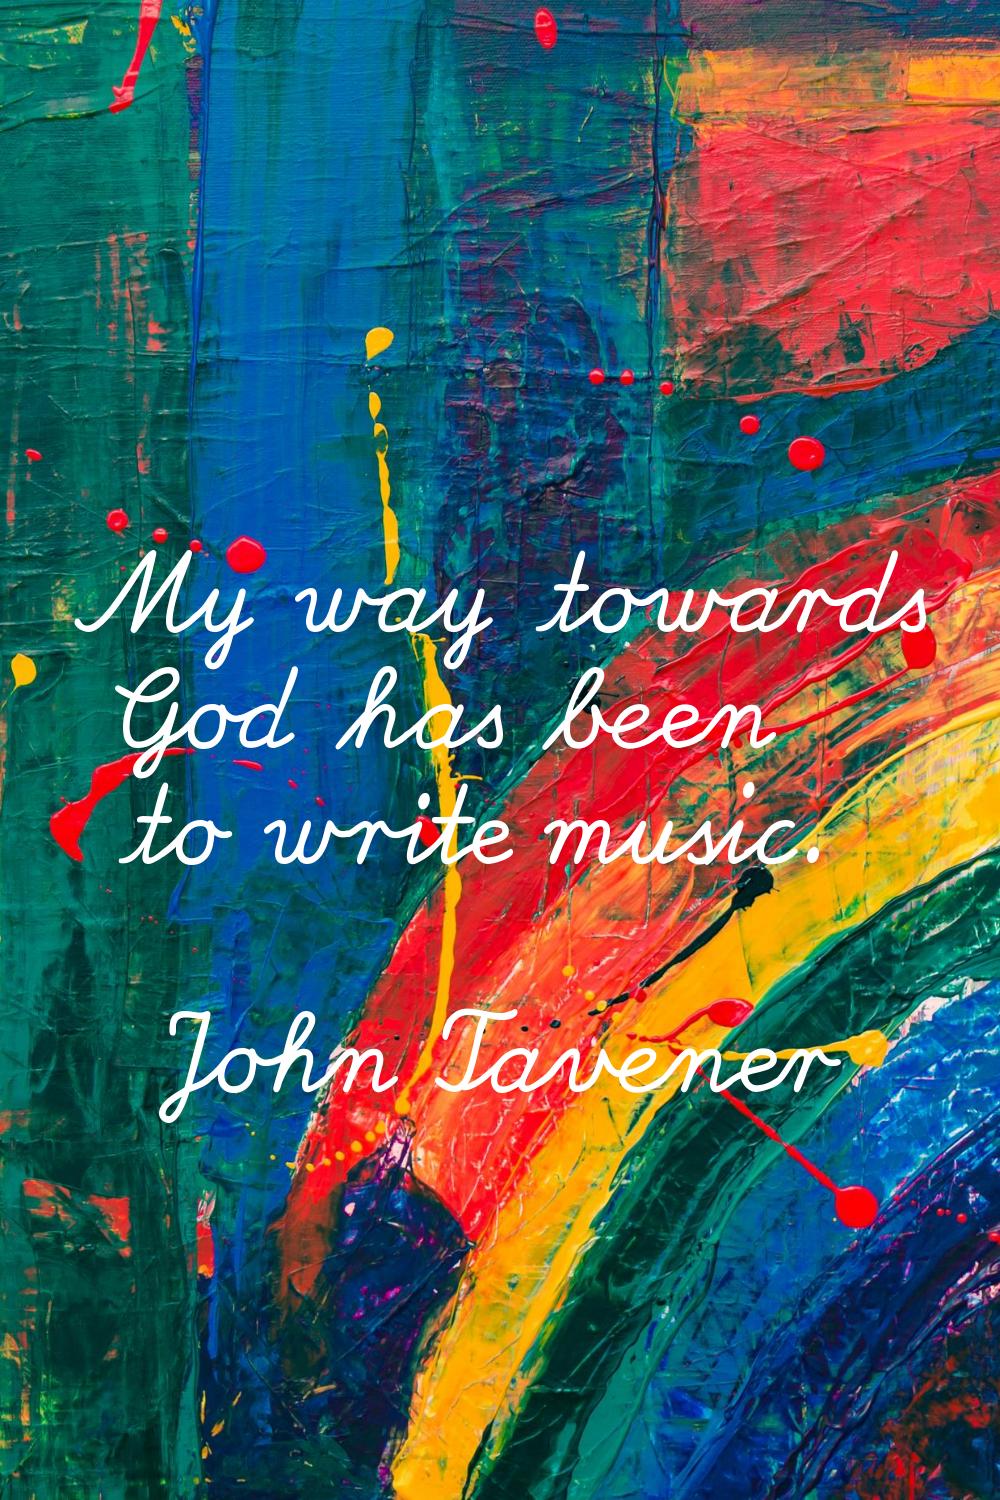 My way towards God has been to write music.